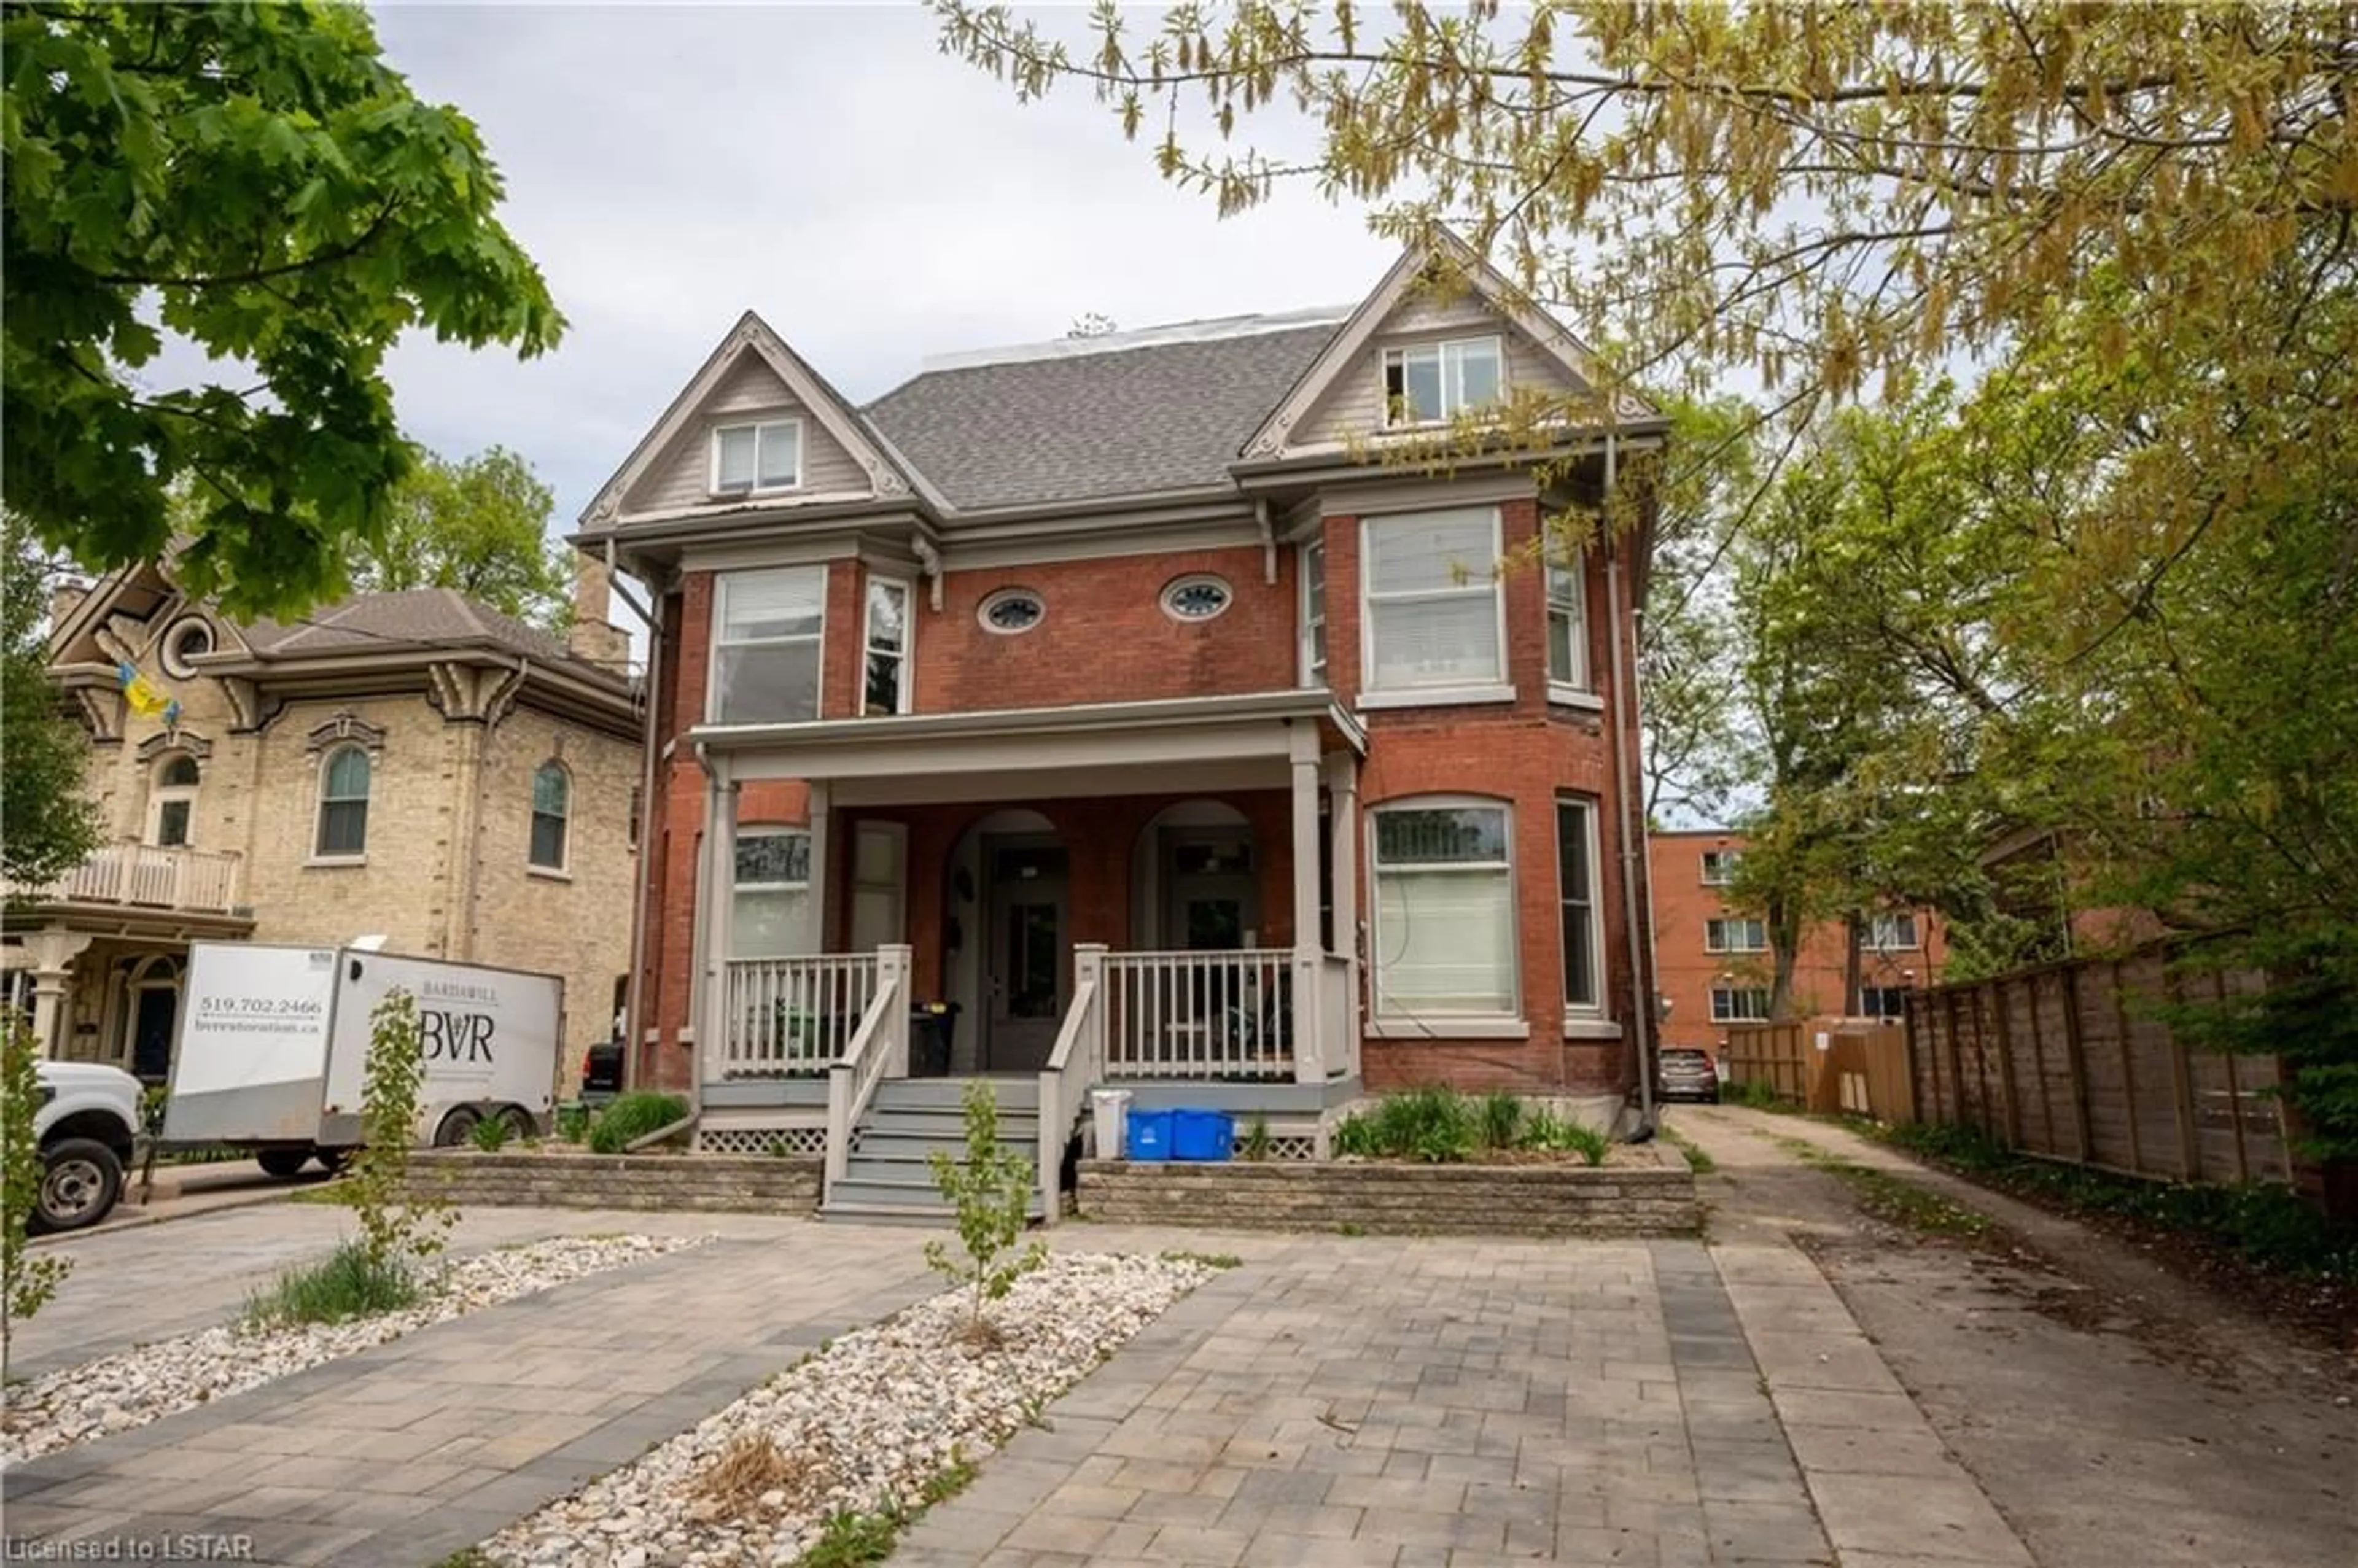 Home with brick exterior material for 500 502 Colborne St, London Ontario N6B 2T5